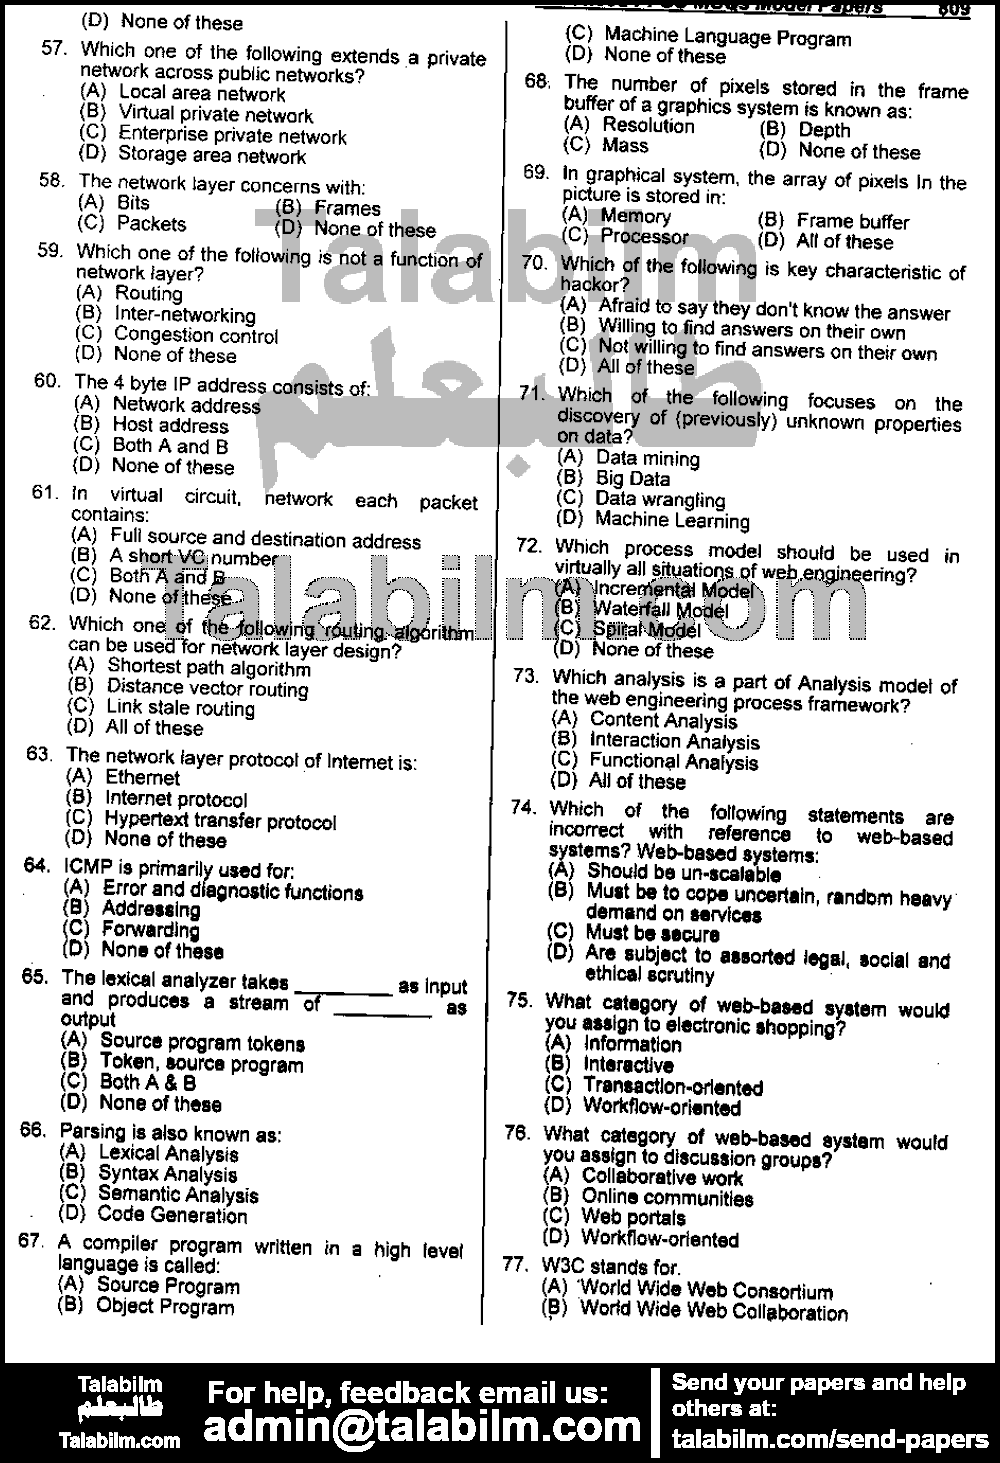 Computer Science Lecturer 0 past paper for 2017 Page No. 4